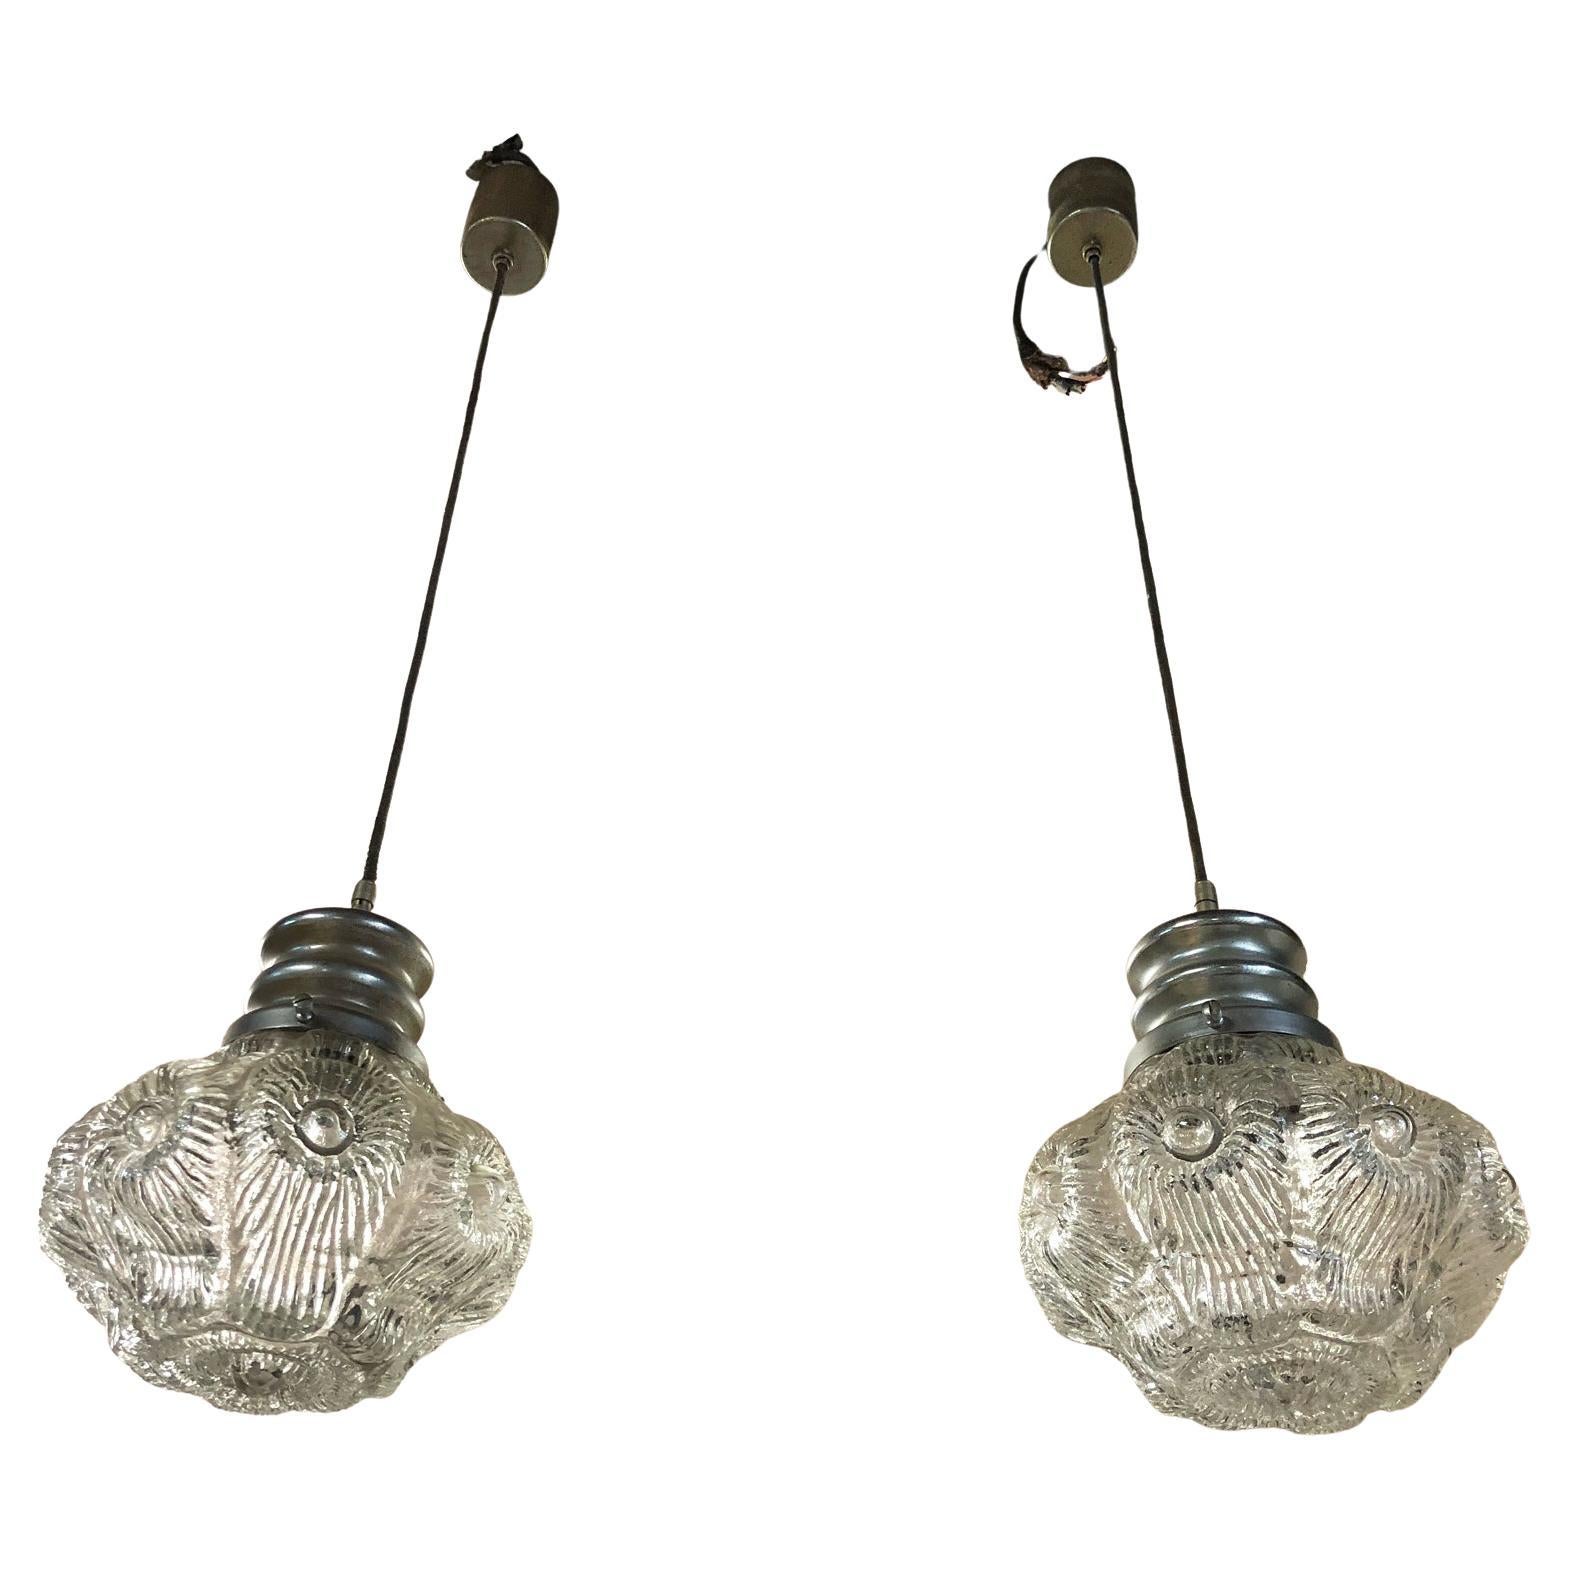 Pair of Original 1960s Italian Chandeliers with Floral-Shaped Glass and Chromed